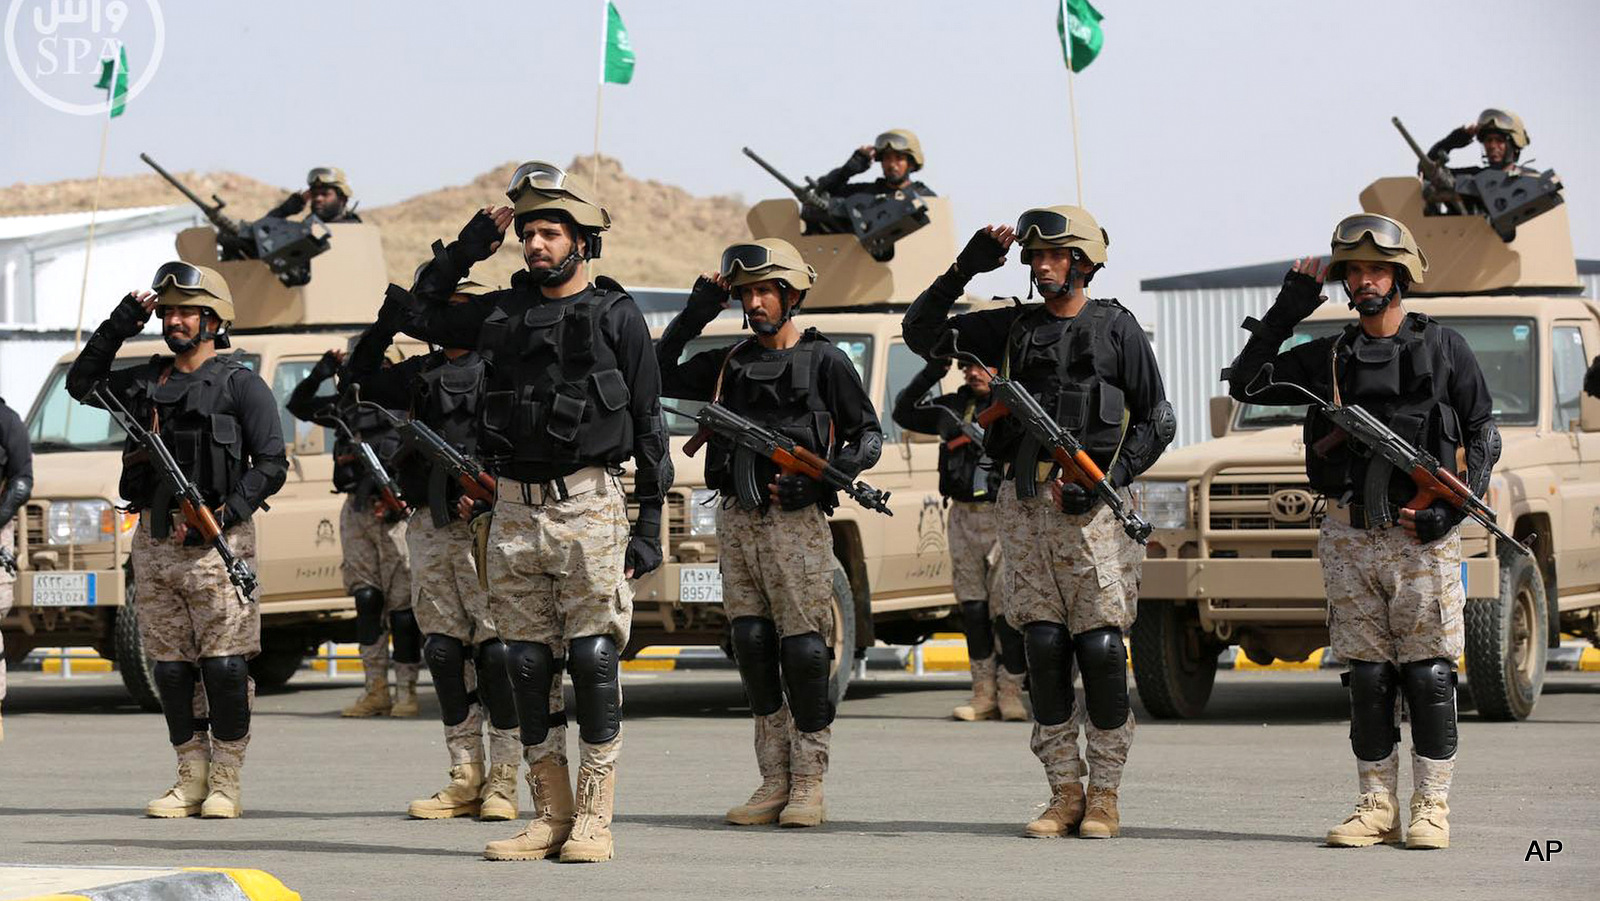 In this photo provided by the Saudi Press Agency (SPA), Royal Saudi Land Forces and units of Special Forces of the Pakistani army take part in a joint military exercise called "Al-Samsam 5" in Shamrakh field, north of Baha region, southwest Saudi Arabia, Monday, March 30, 2015. 